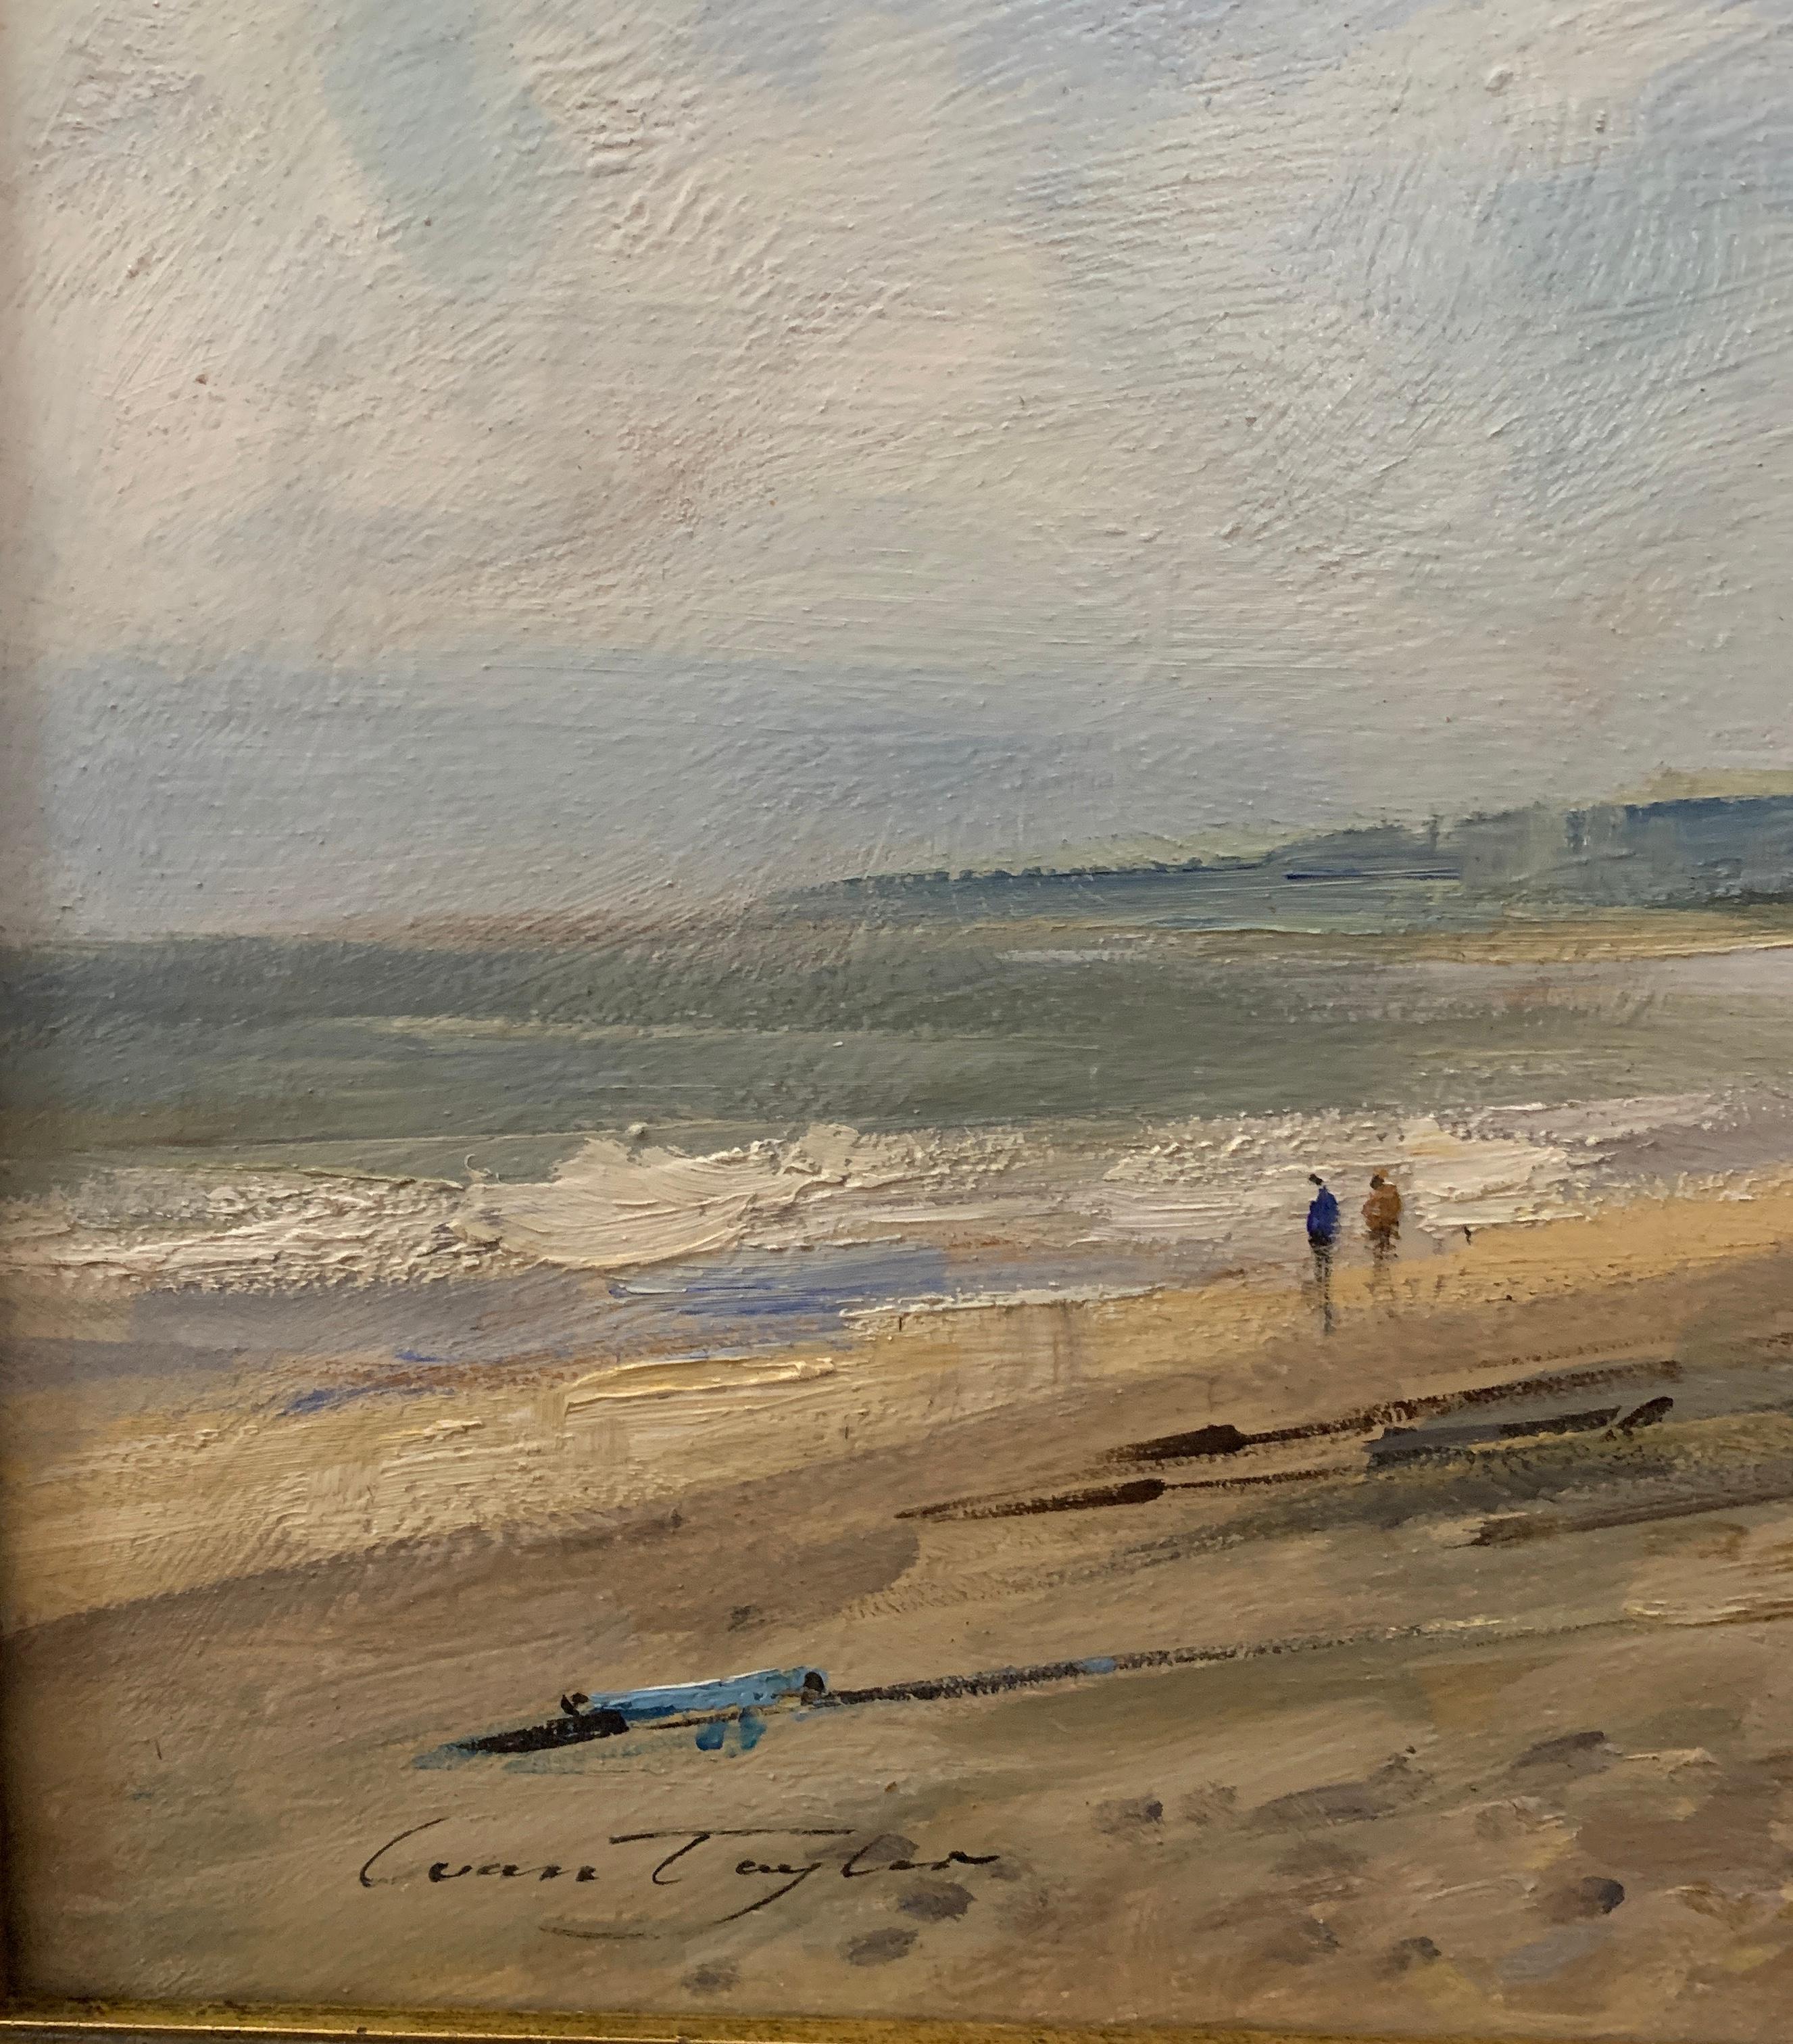 English Impressionist beach, shore scene with fishing boats, huts and landscape 

Born in North Staffordshire Ivan showed an early interest in art and in drawing and painting. His interest developed his talent and he exhibited 40 paintings on the